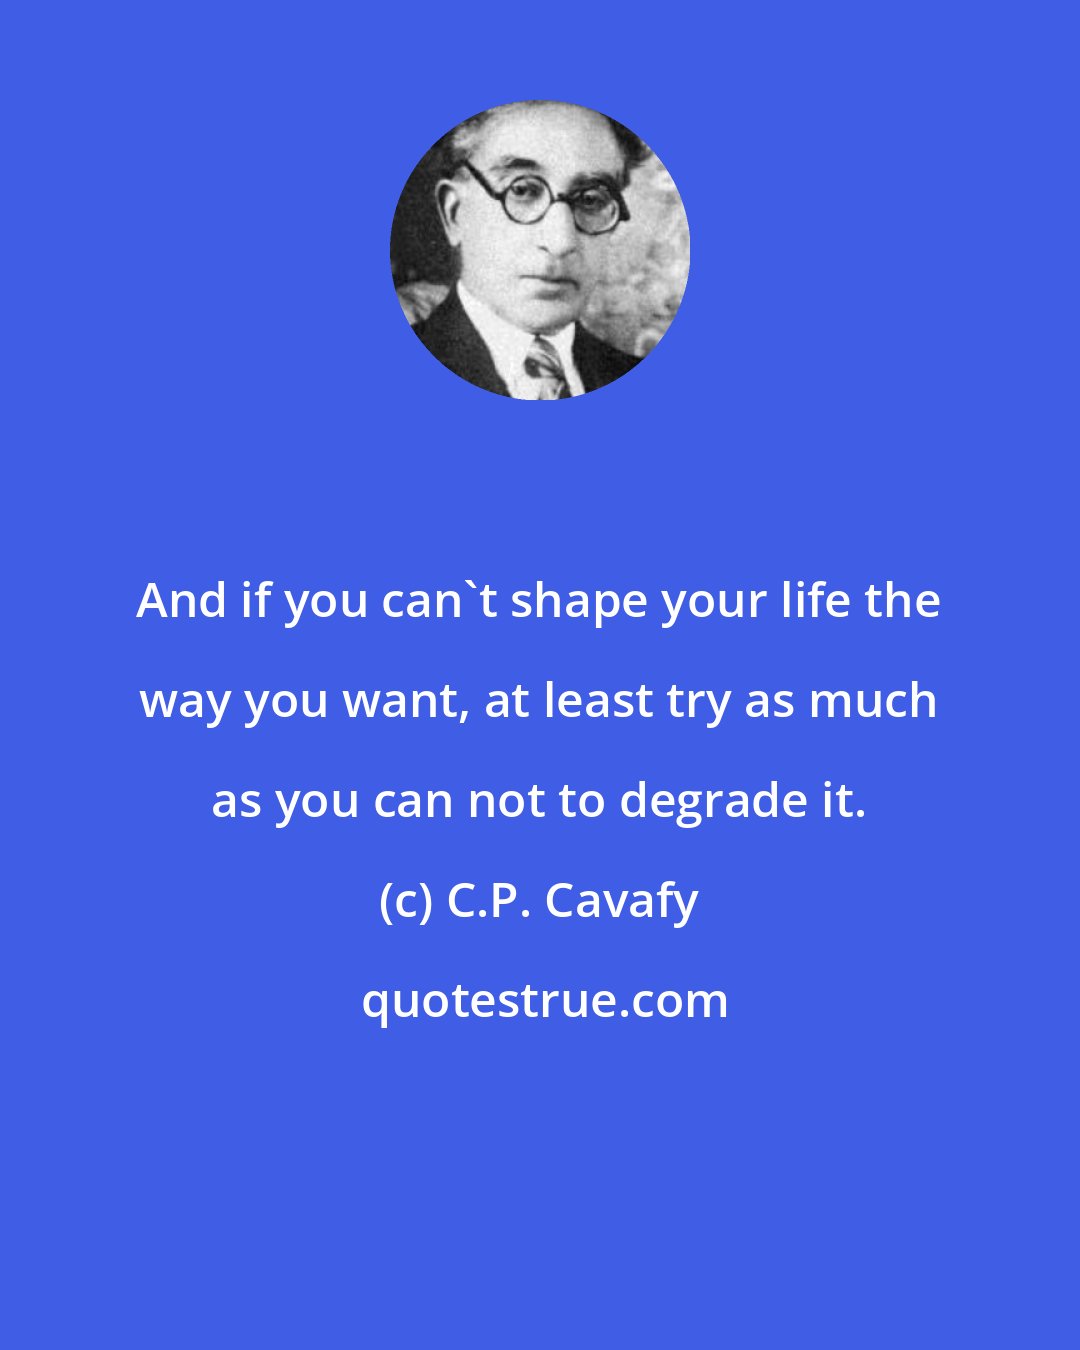 C.P. Cavafy: And if you can't shape your life the way you want, at least try as much as you can not to degrade it.